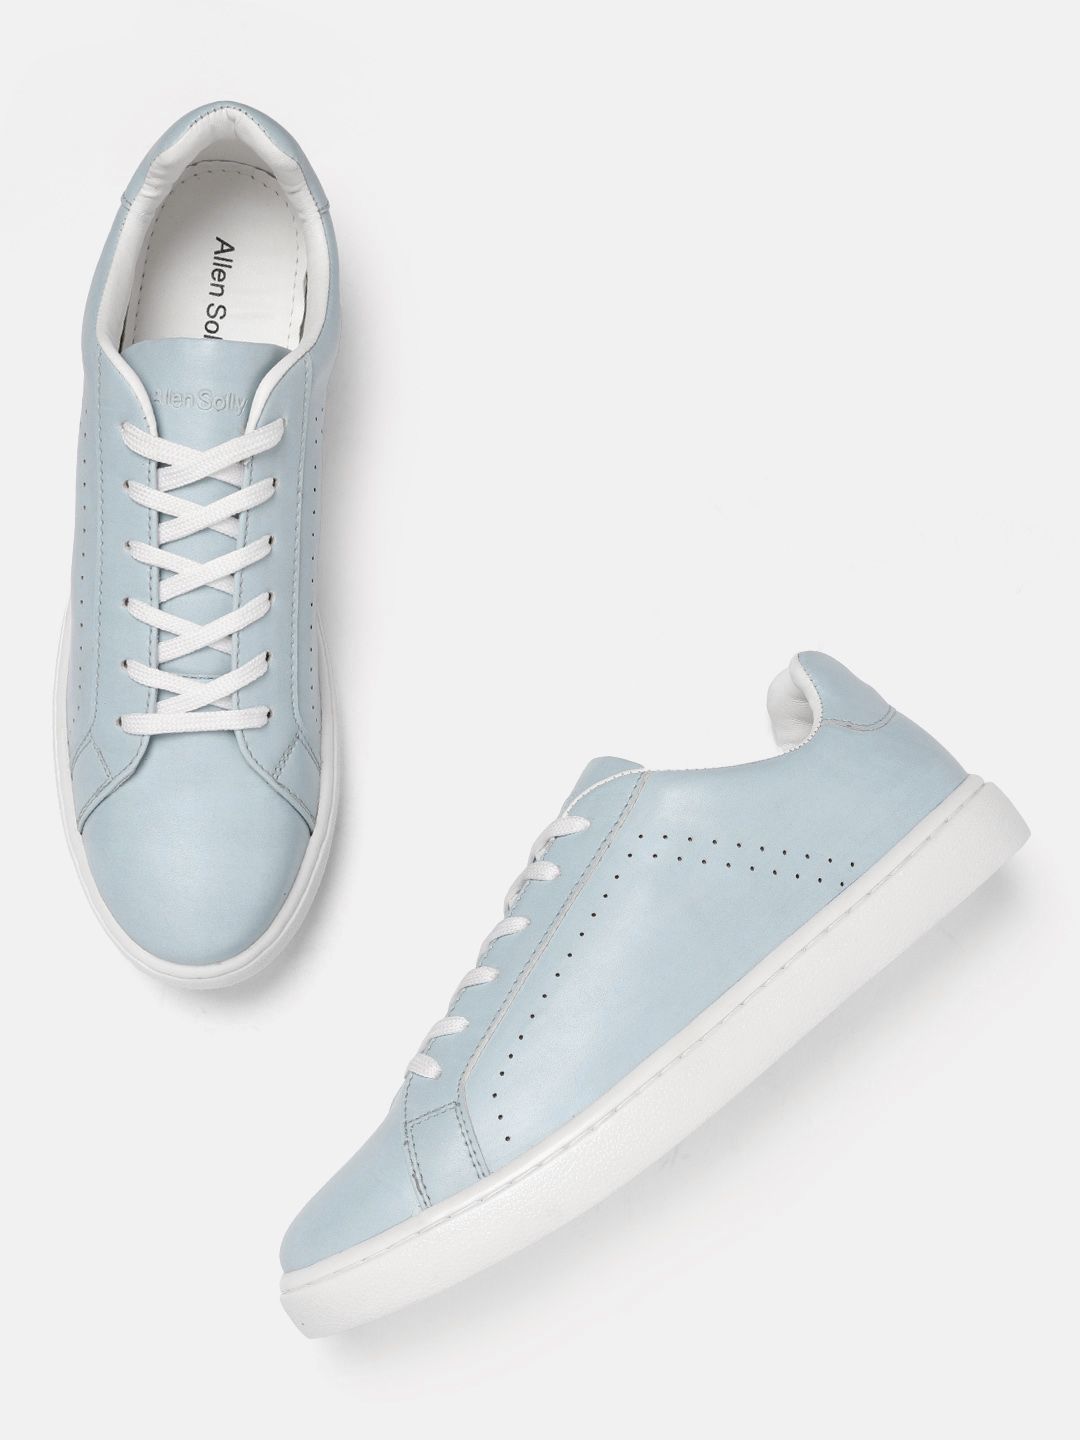 Allen Solly Women Blue Perforated Detail Sneakers Price in India